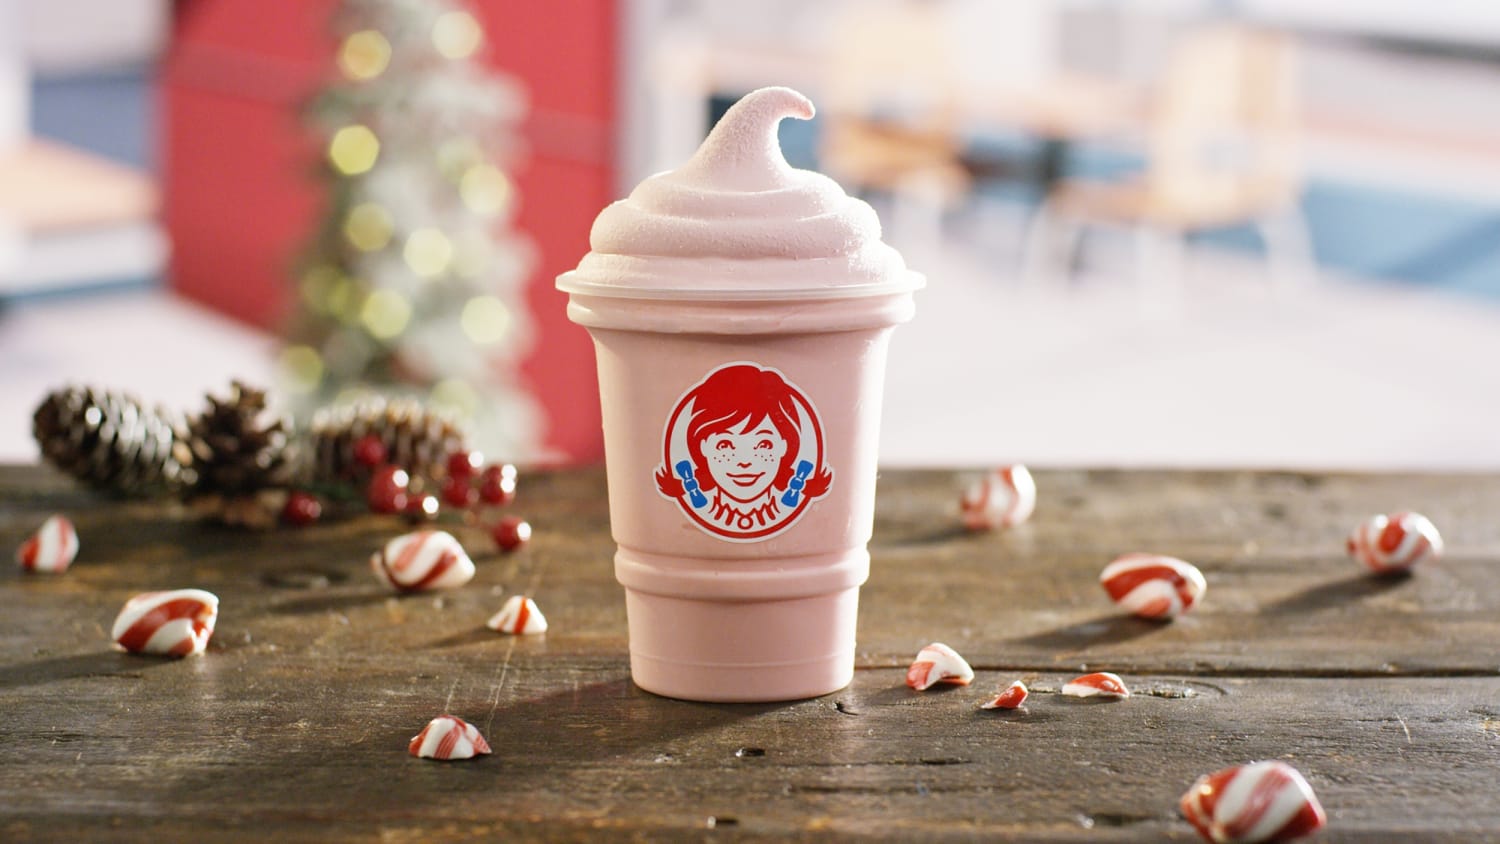 Wendy's Peppermint Frosty is returning for the holiday season